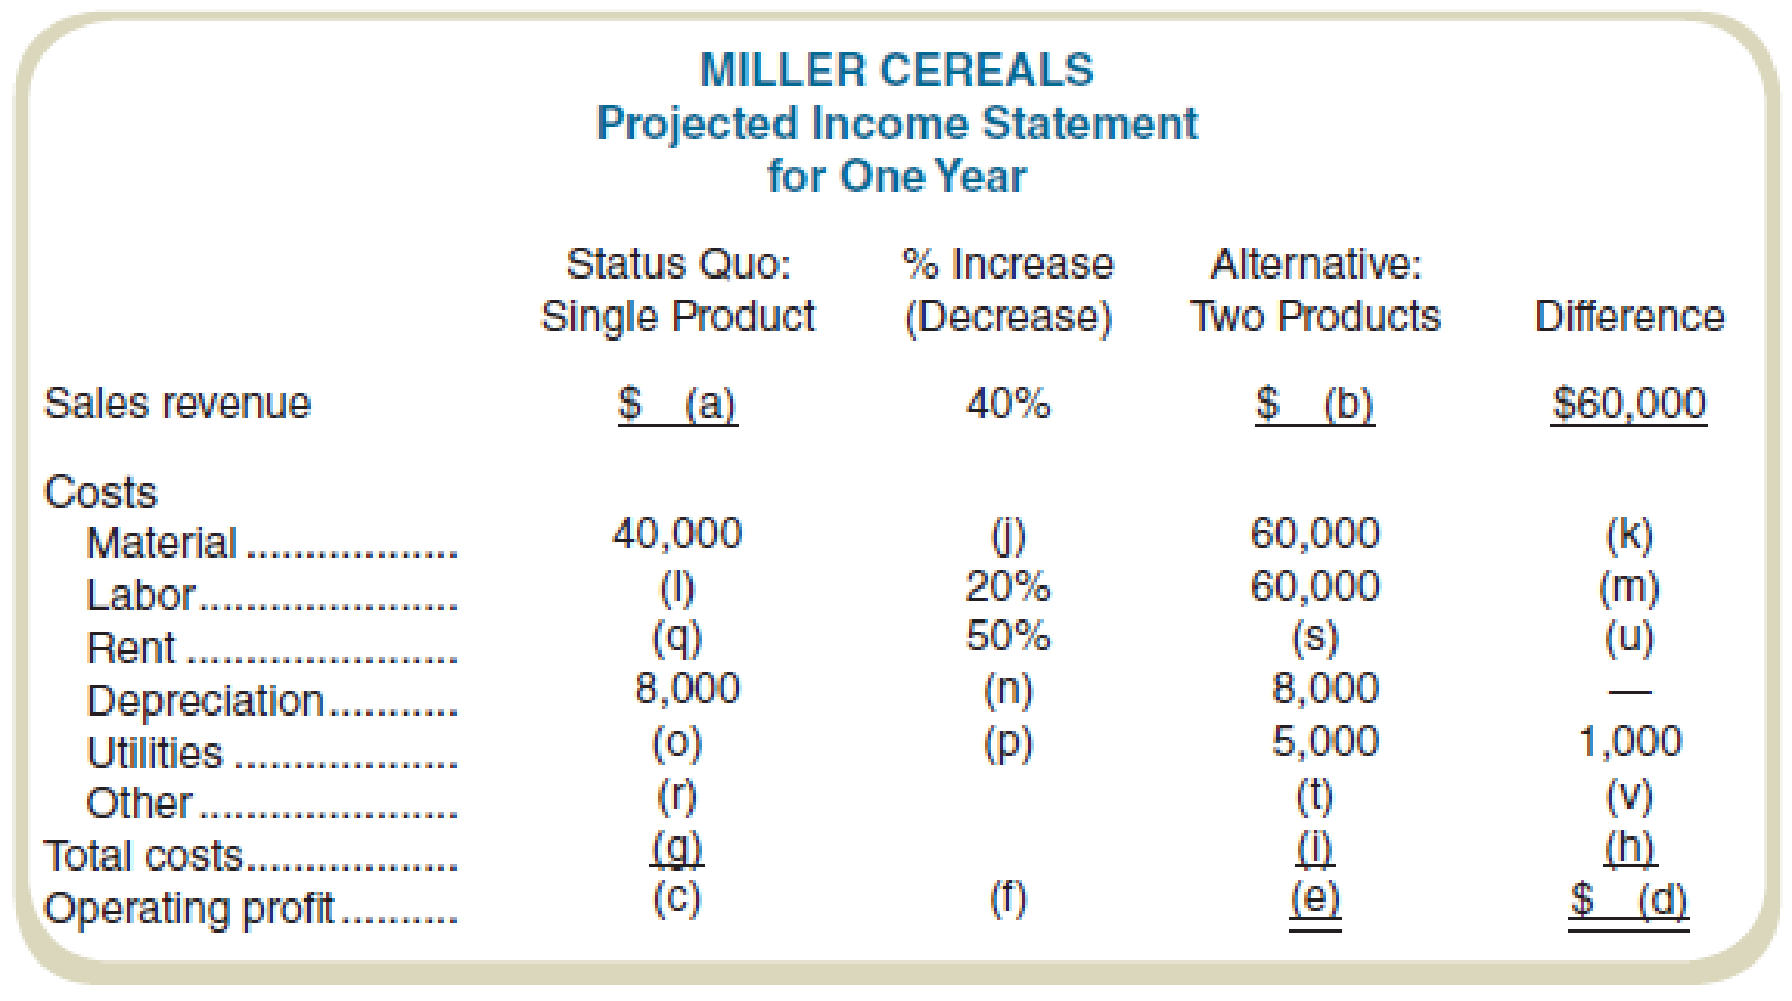 Chapter 1, Problem 48IC, Miller Cereals is a small milling company that makes a single brand of cereal. Recently, a business 